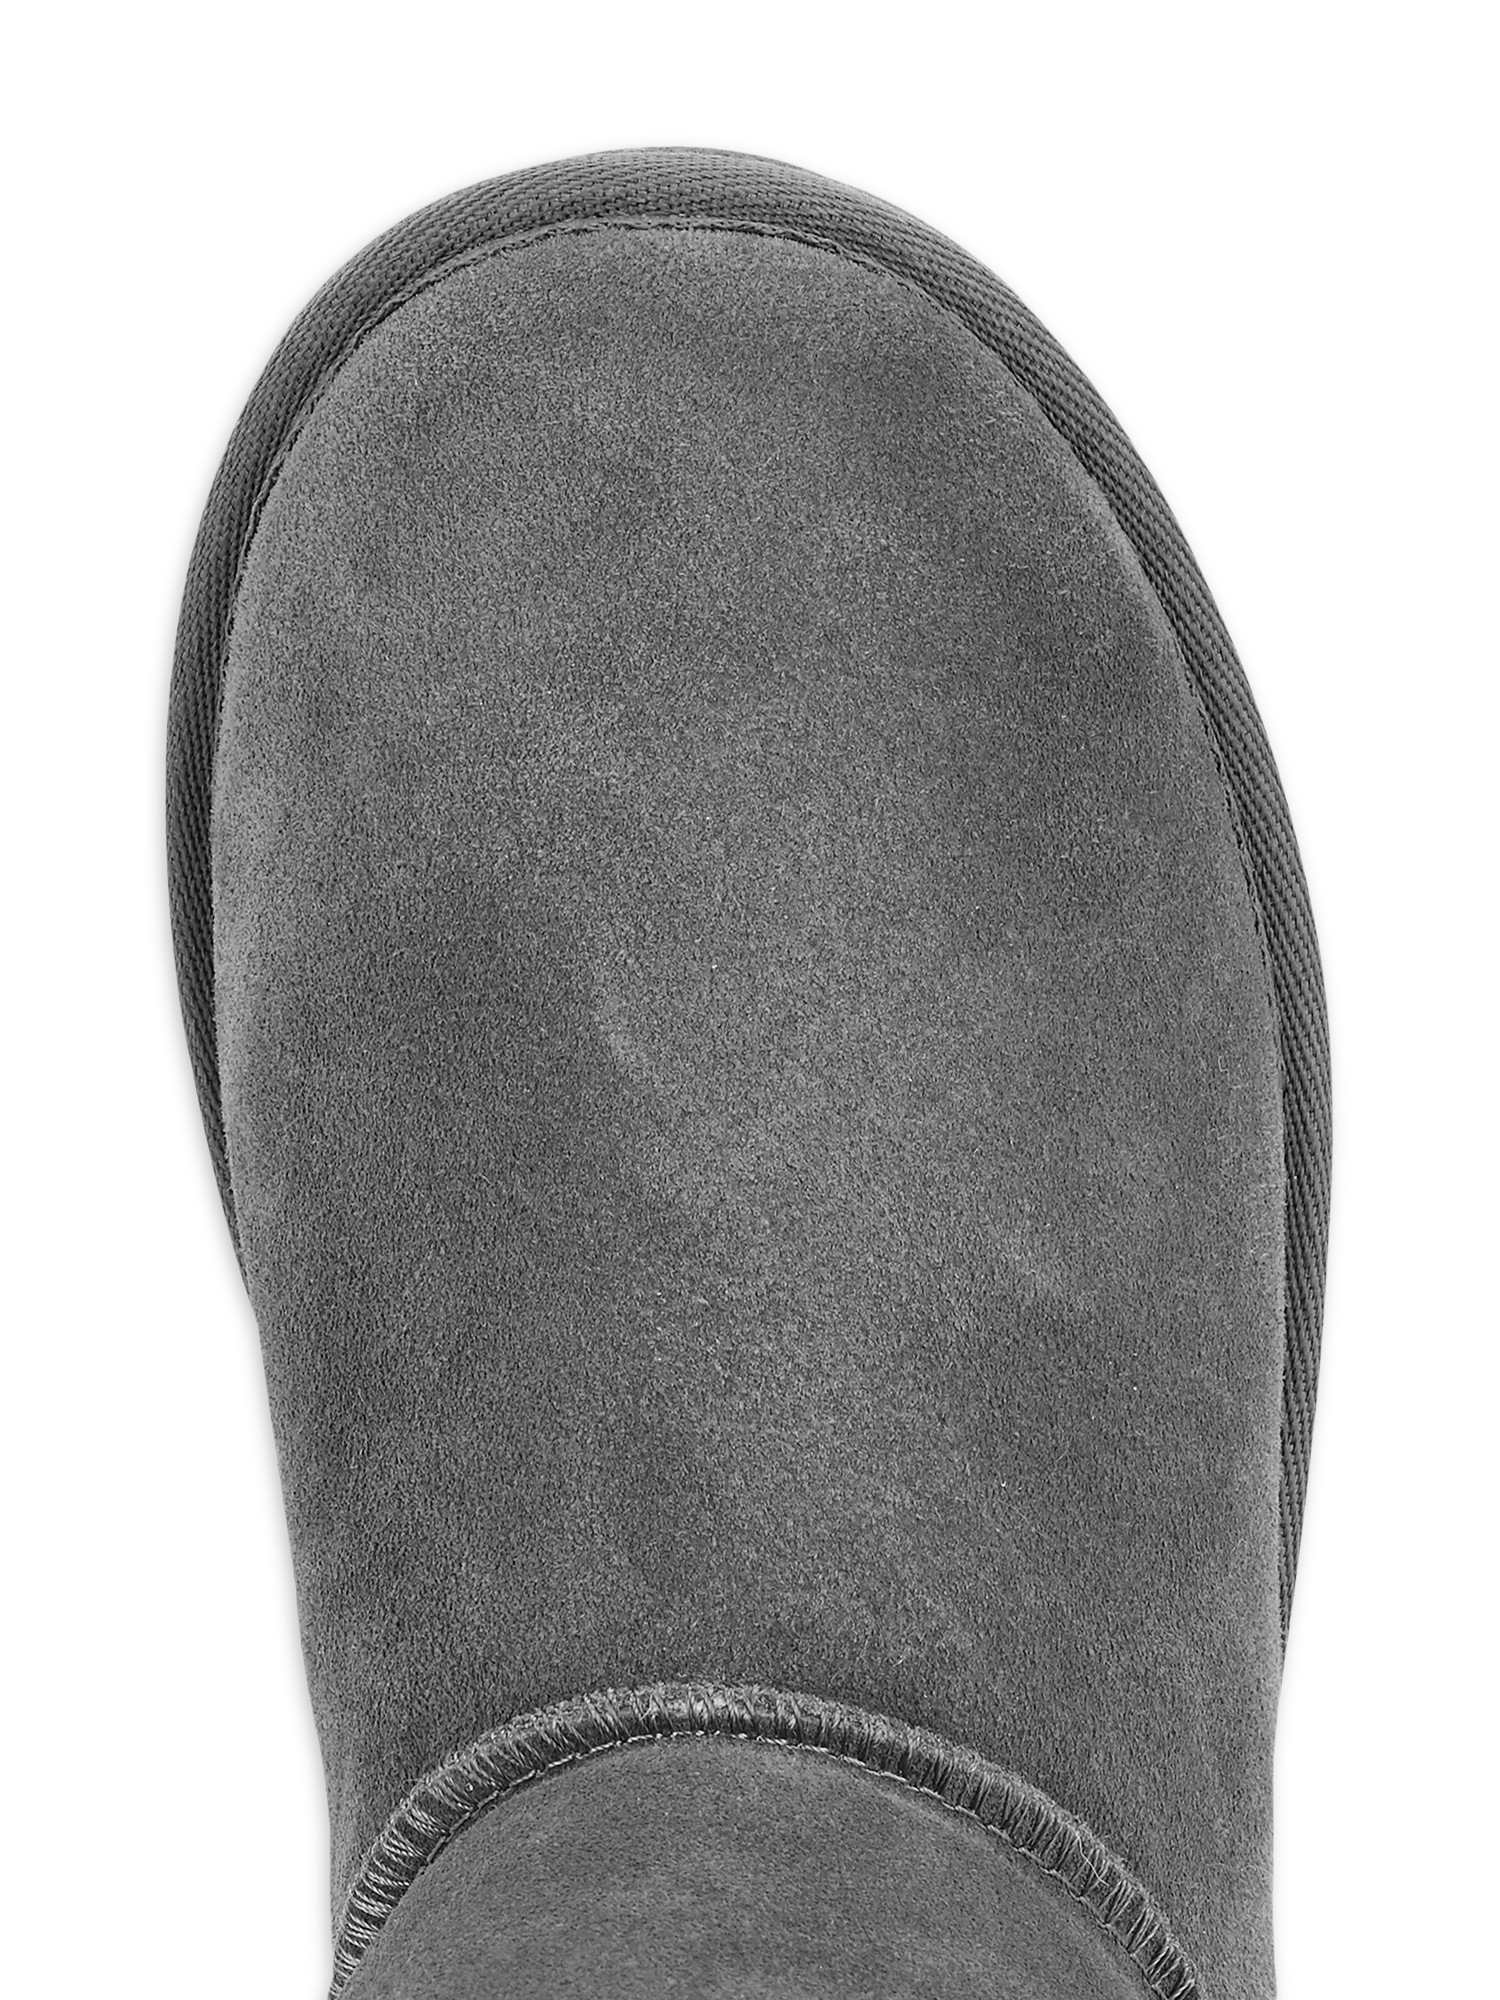 Portland Boot Company Women's Maryanne 8" Suede Winter Boot - image 2 of 5